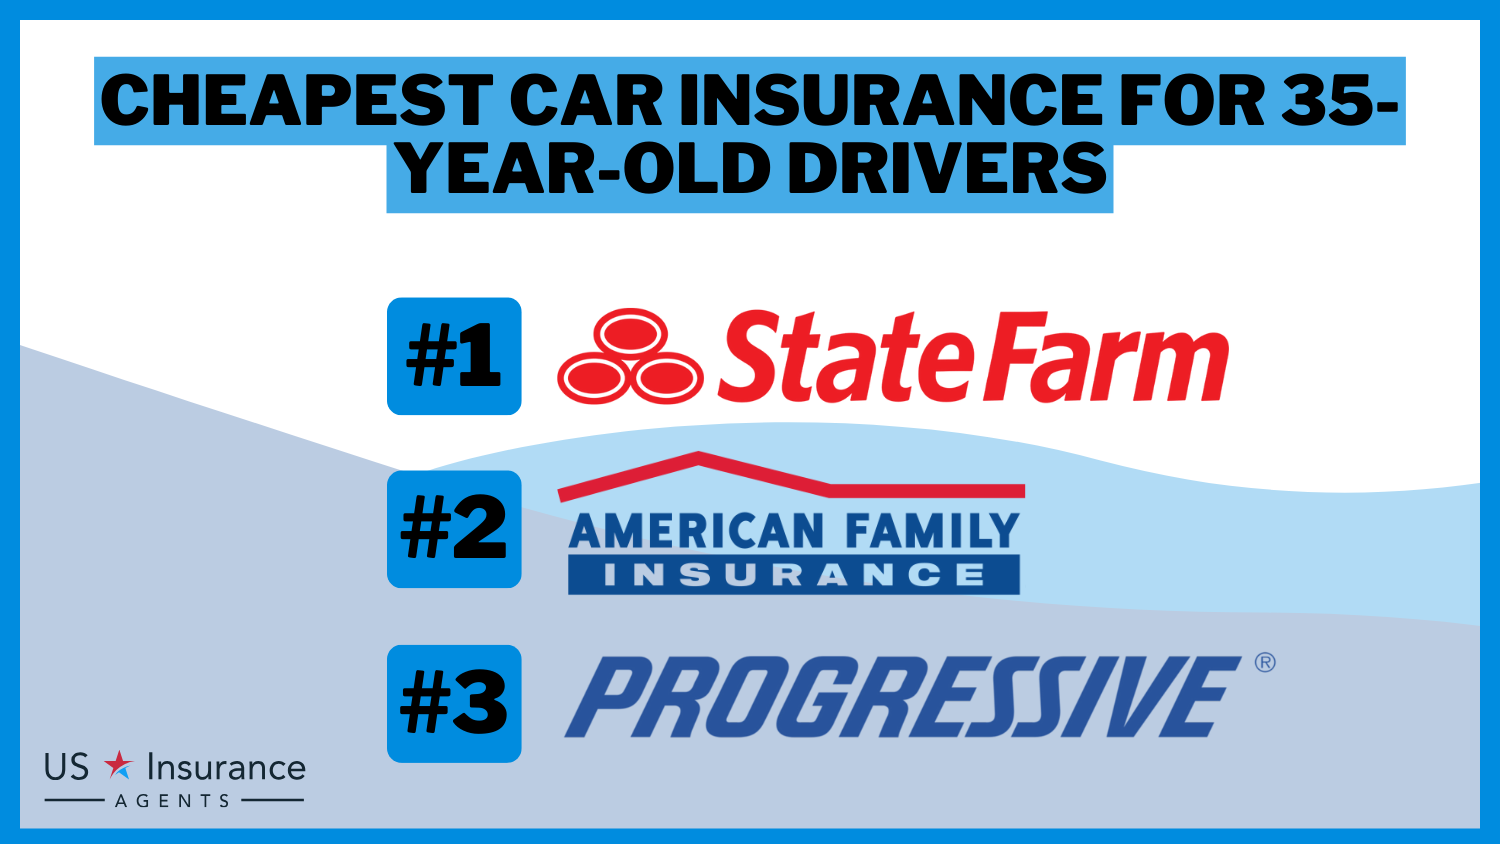 Cheapest Car Insurance for 35-Year-Old Drivers: State Farm, American Family, and Progressive